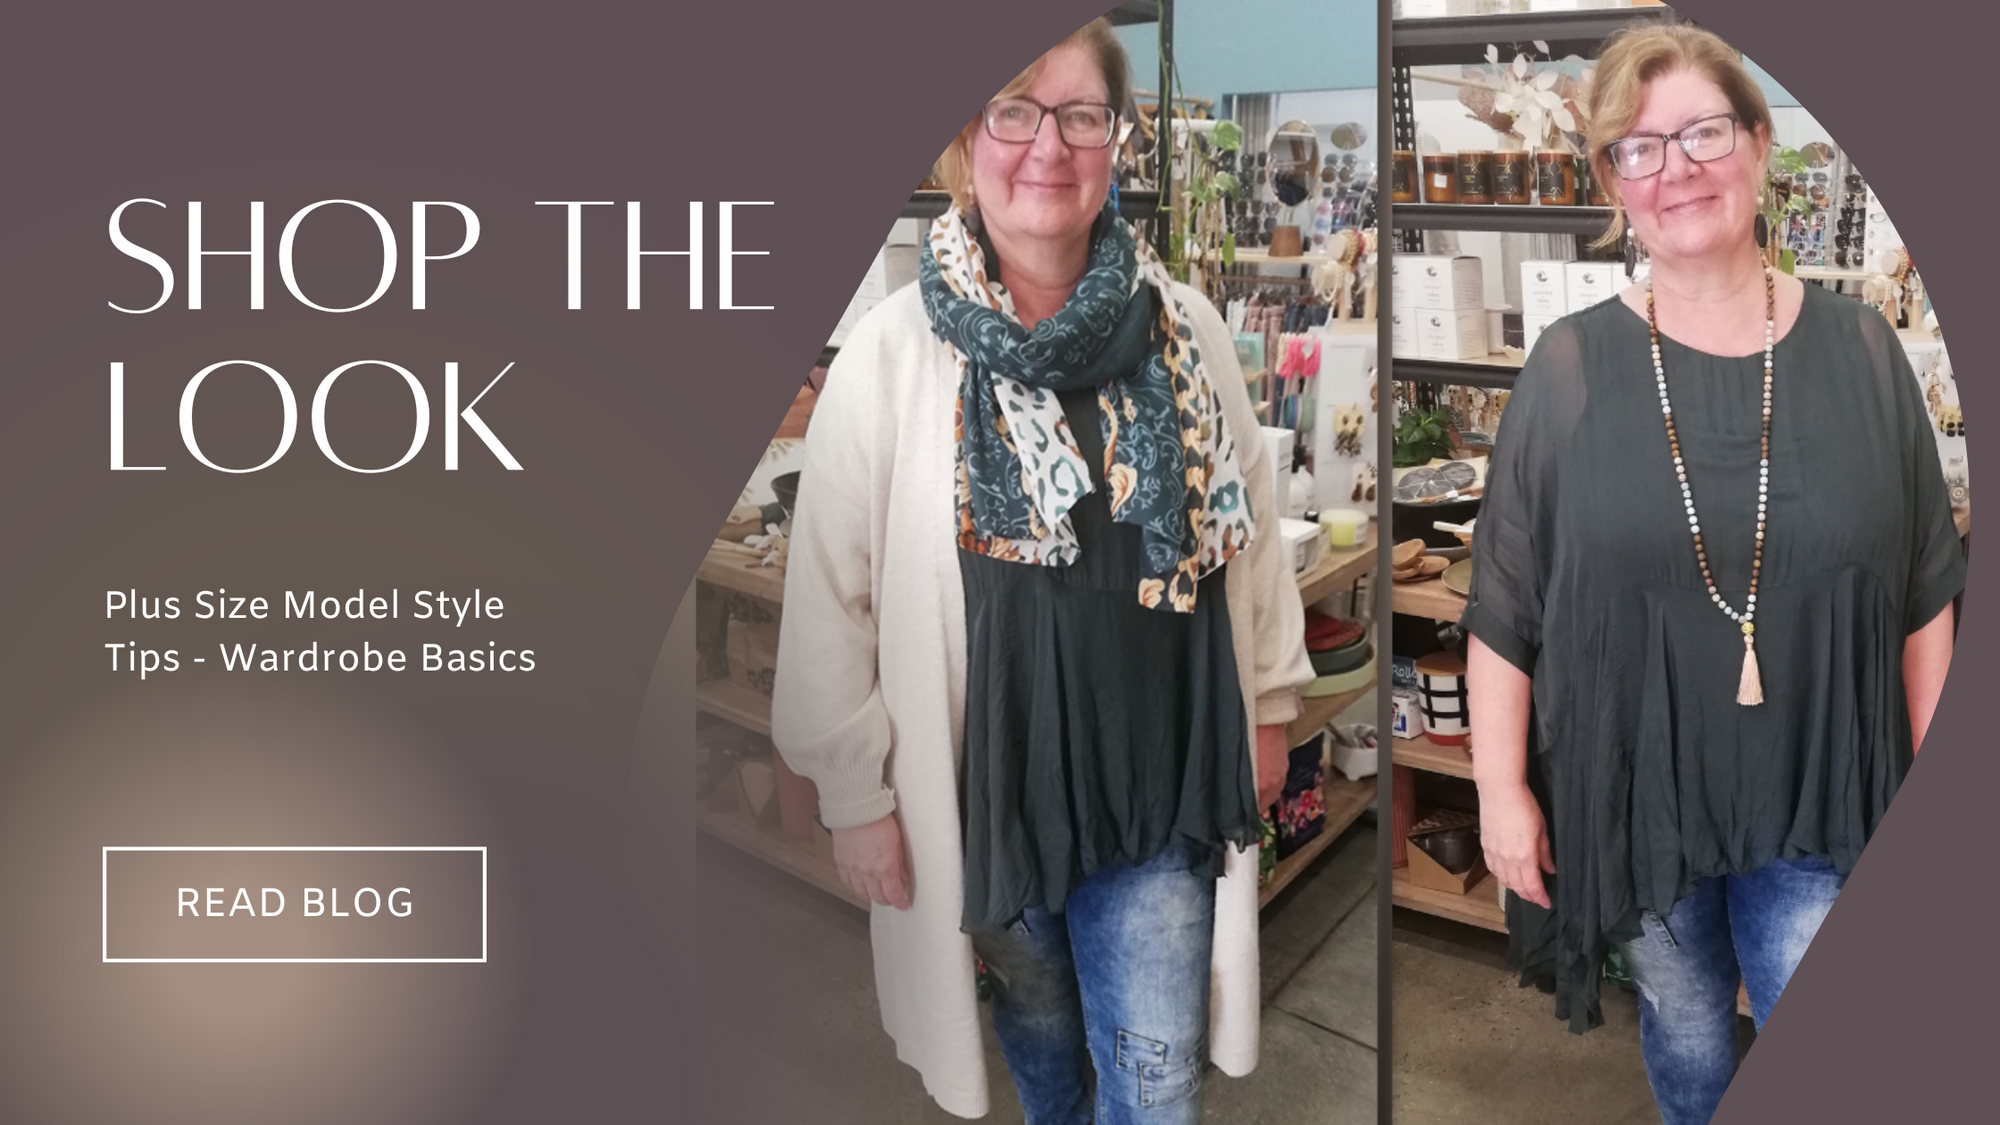 Shop the Look for Plus Size Models at Kindred Spirit Boutique and Gift